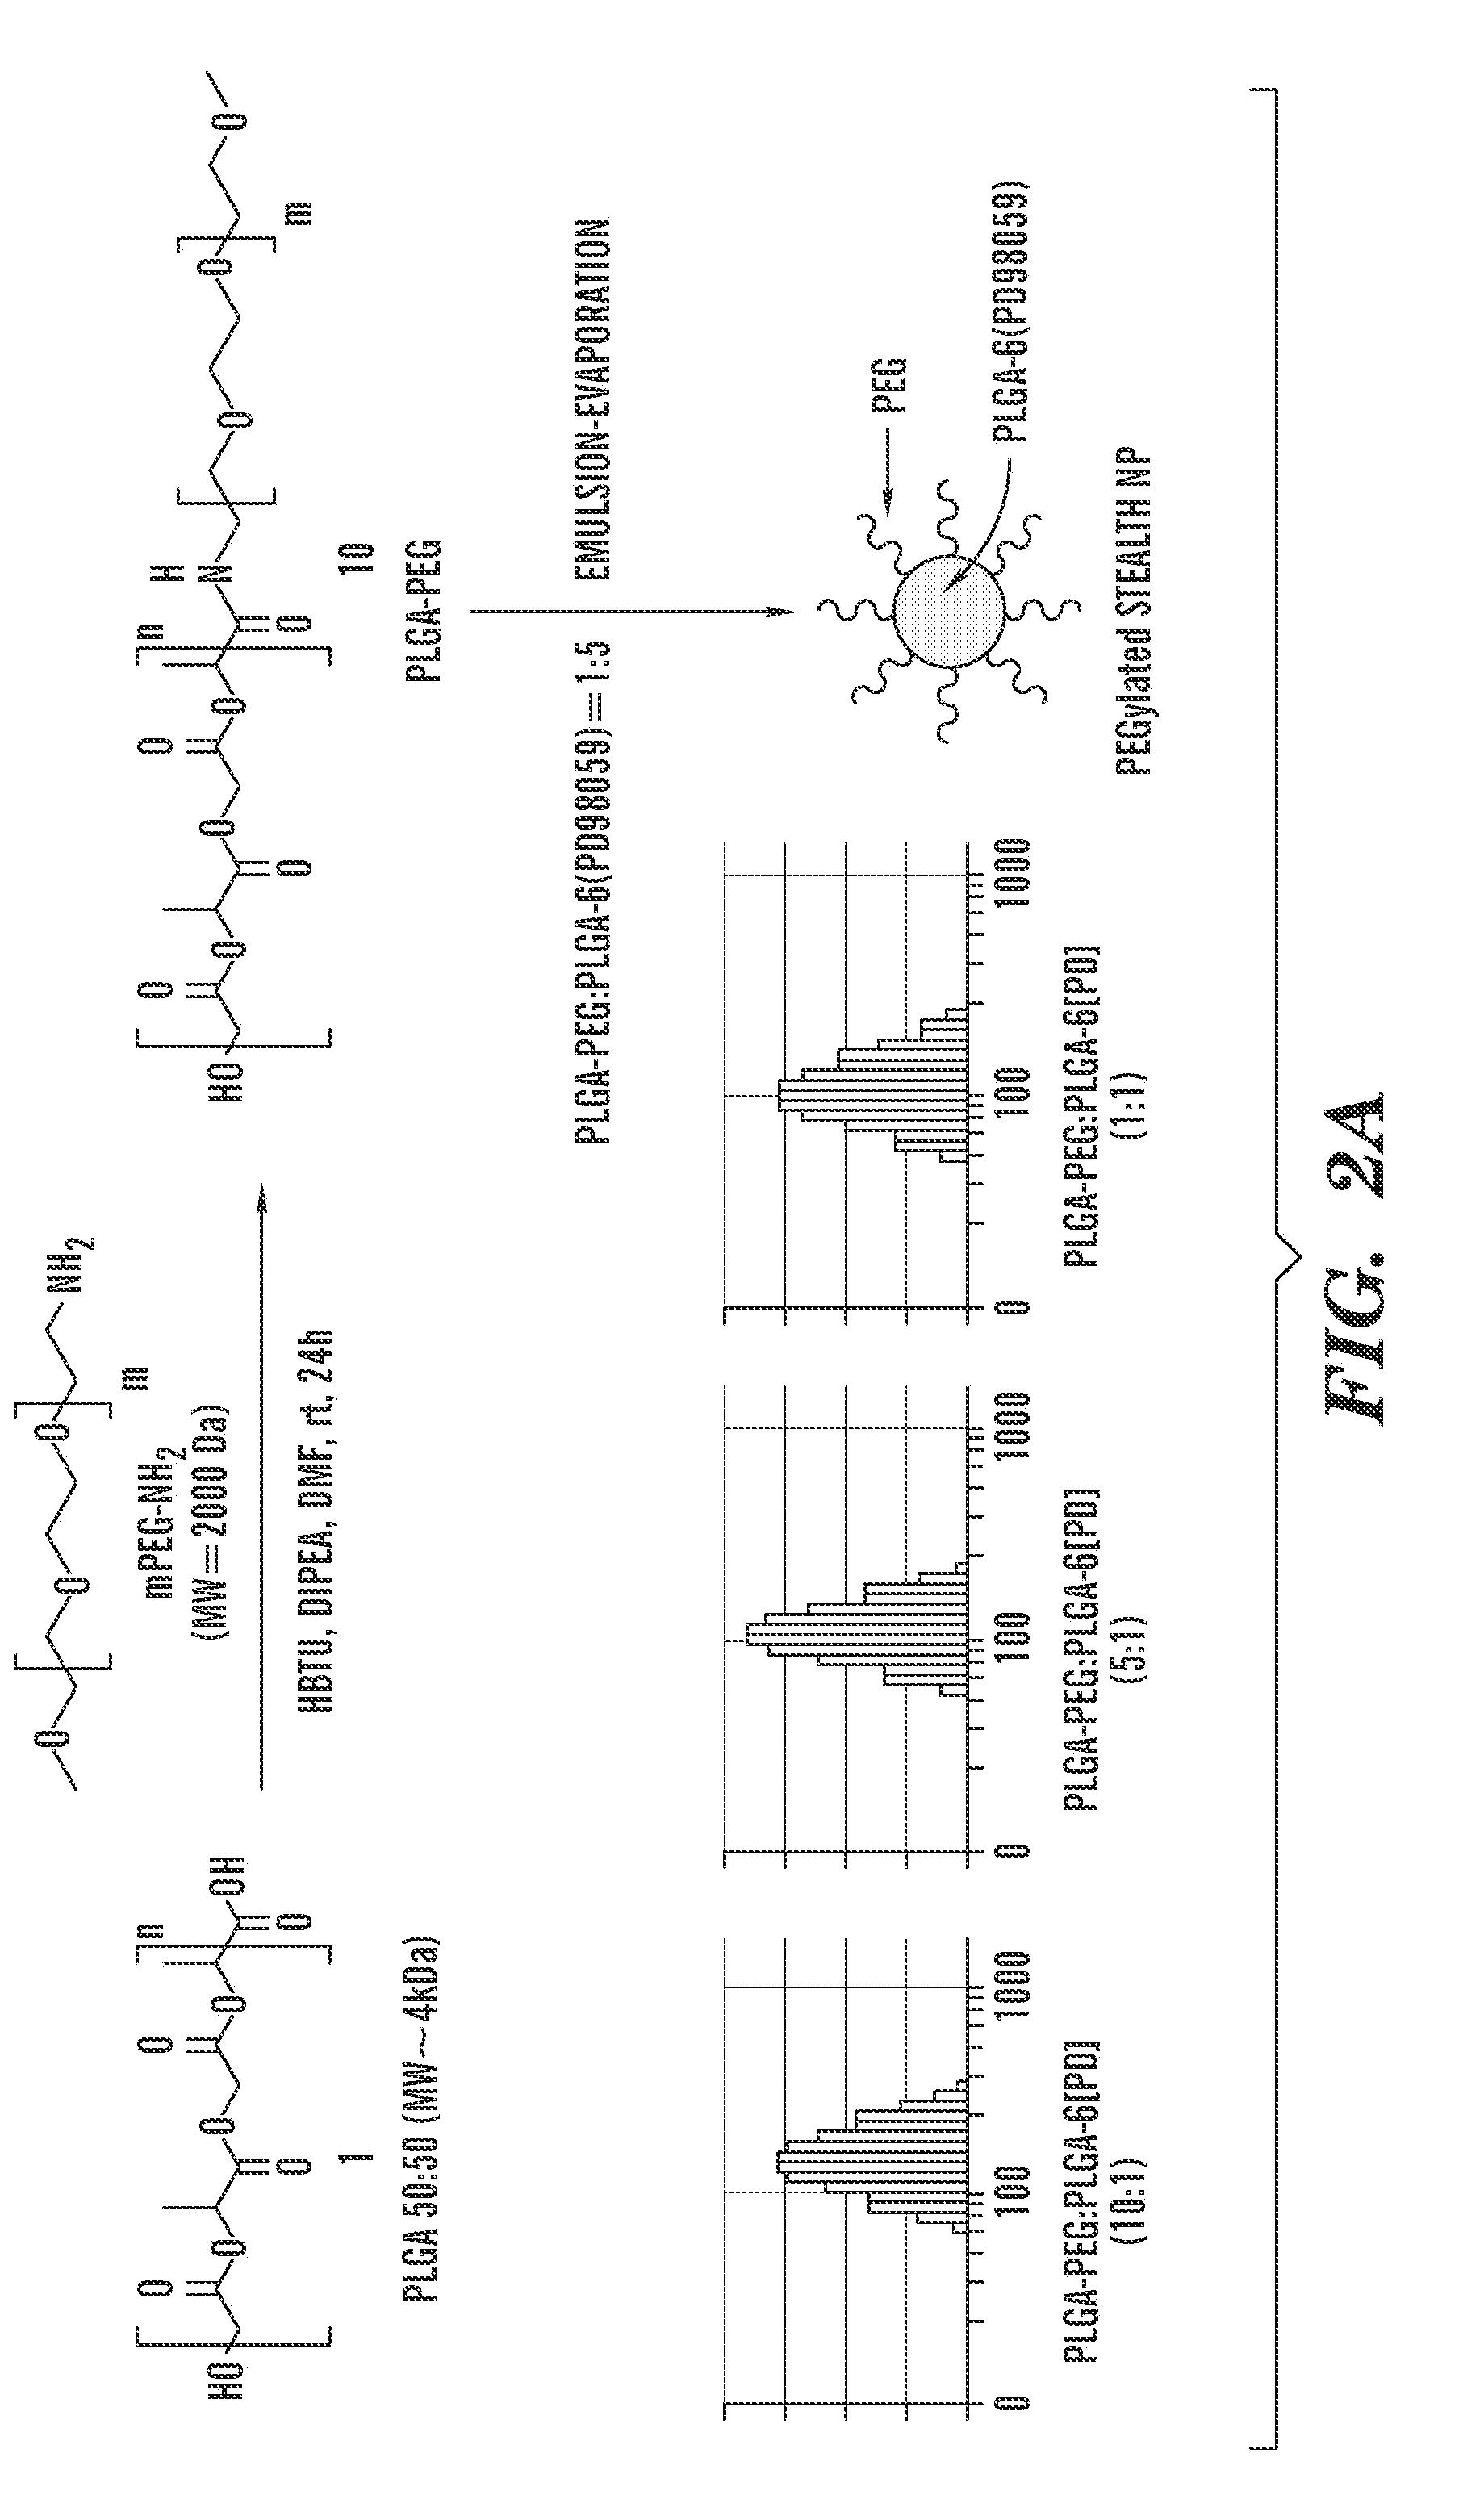 Polymeric nanoparticles with enhanced drug-loading and methods of use thereof